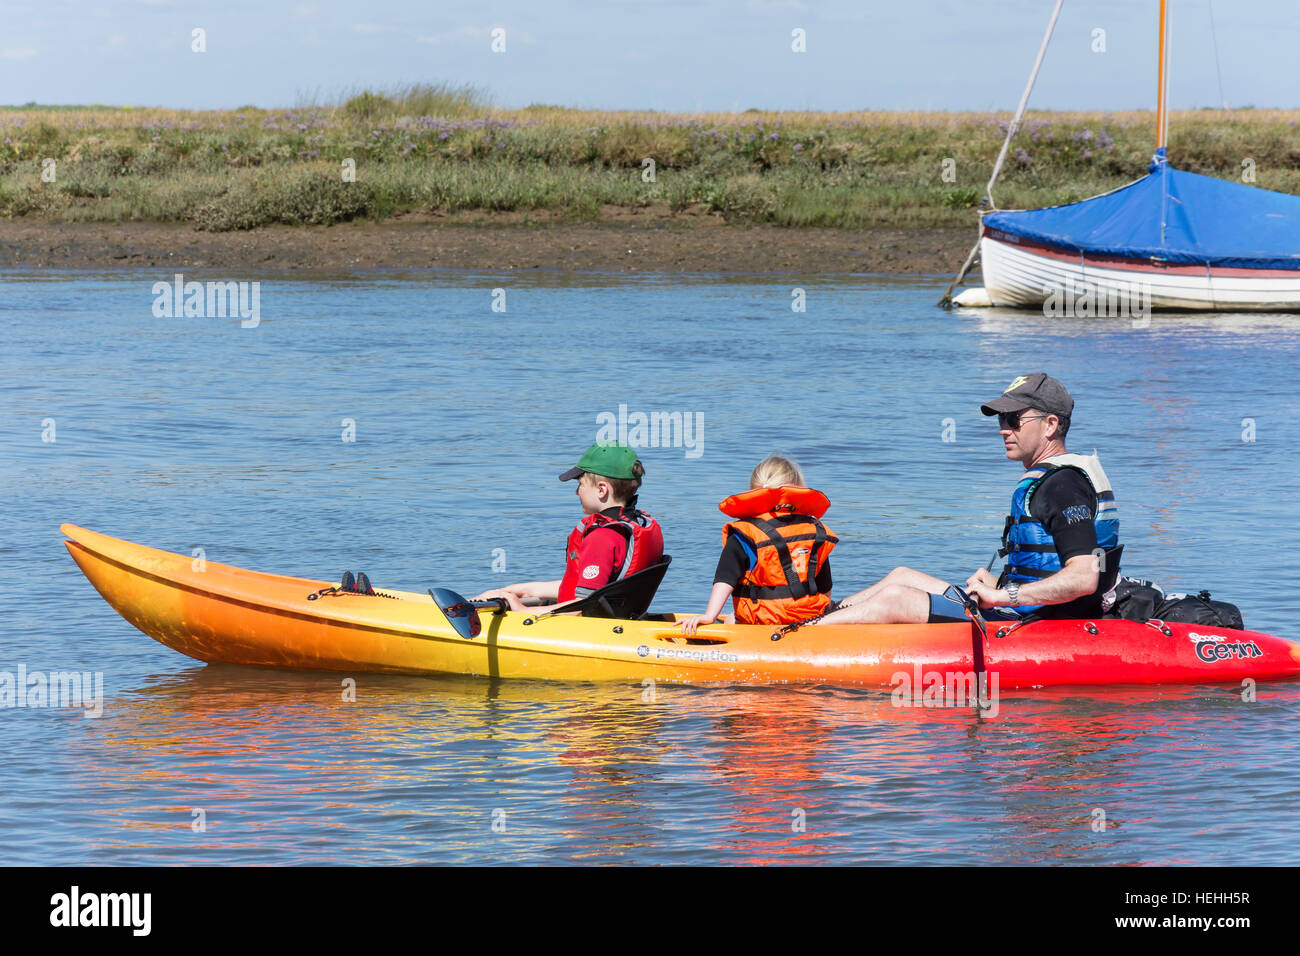 Father and children on kayak on River Burn, The Quay, Burnham Overy Staithe, Norfolk, England, United Kingdom Stock Photo